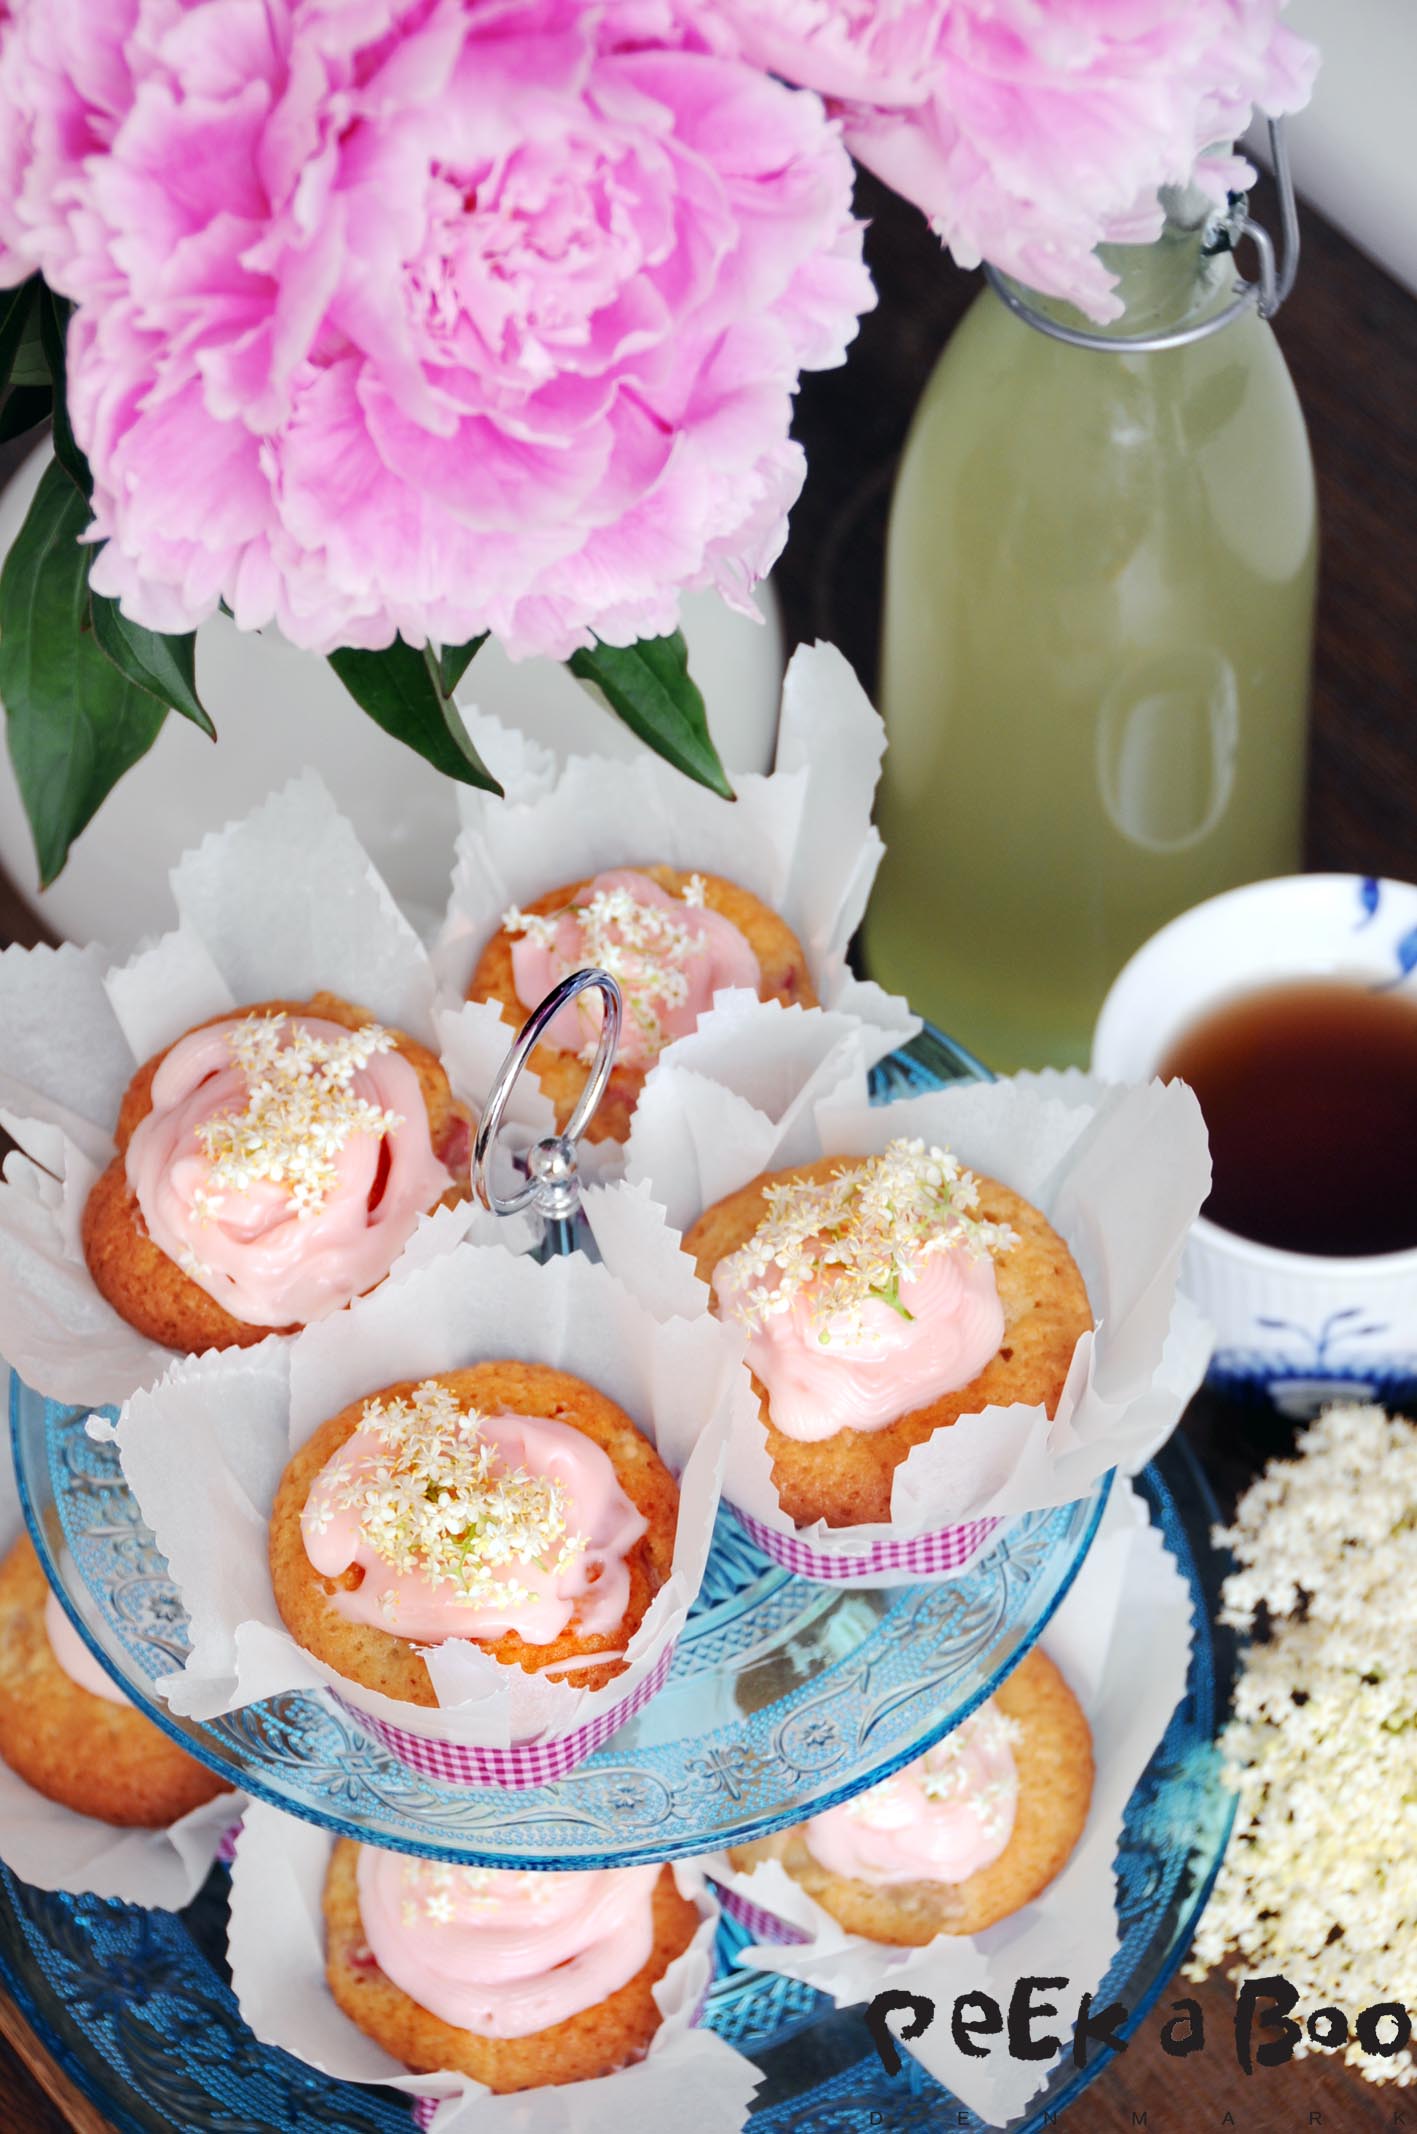 Elderflower muffins with rhubarb find the recipe in my book together with other recipes with elderflower.